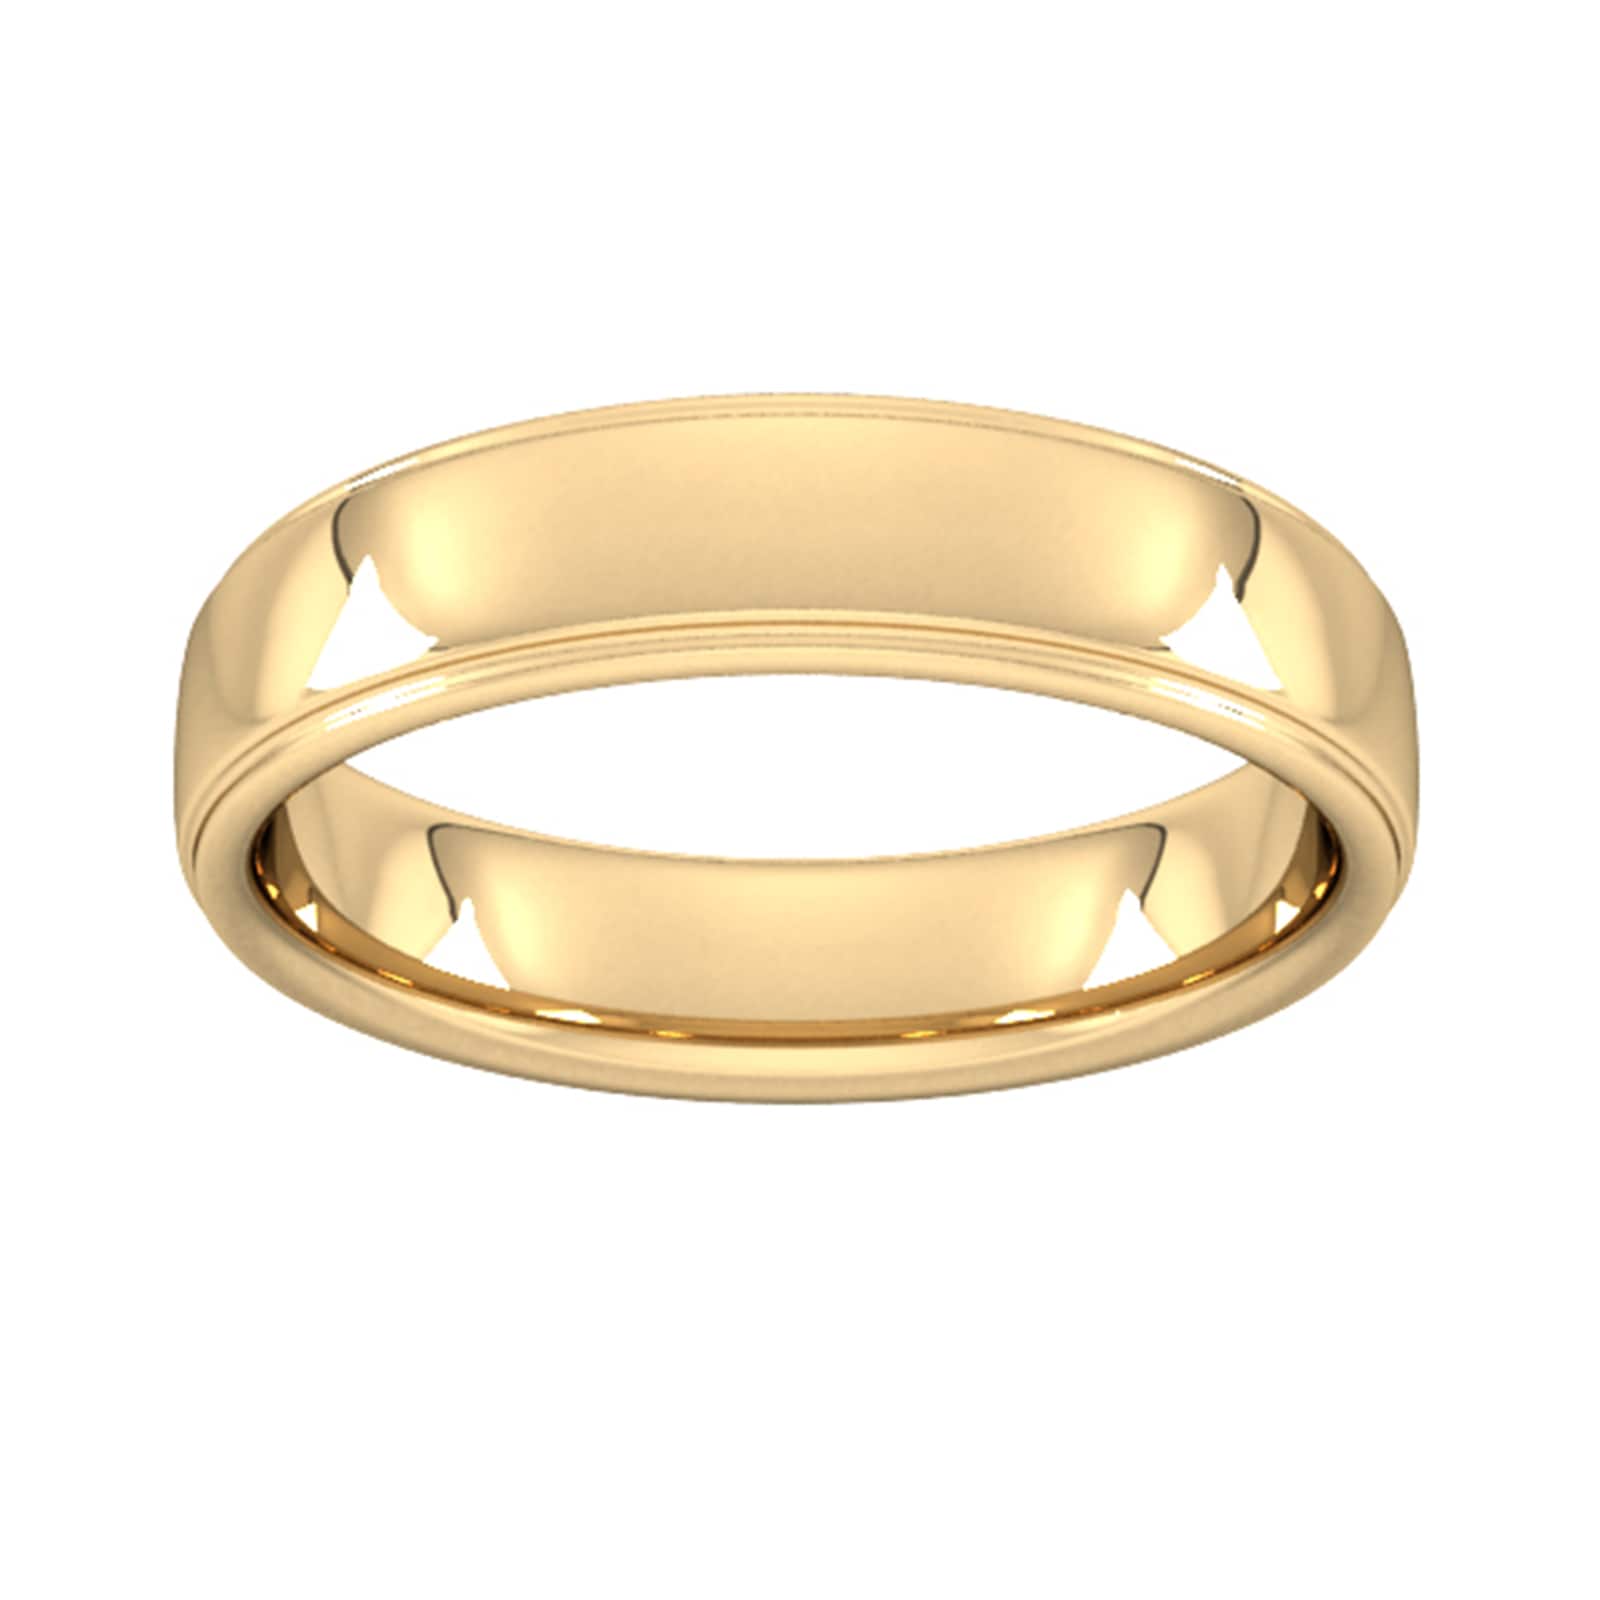 5mm Slight Court Extra Heavy Polished Finish With Grooves Wedding Ring In 9 Carat Yellow Gold - Ring Size K